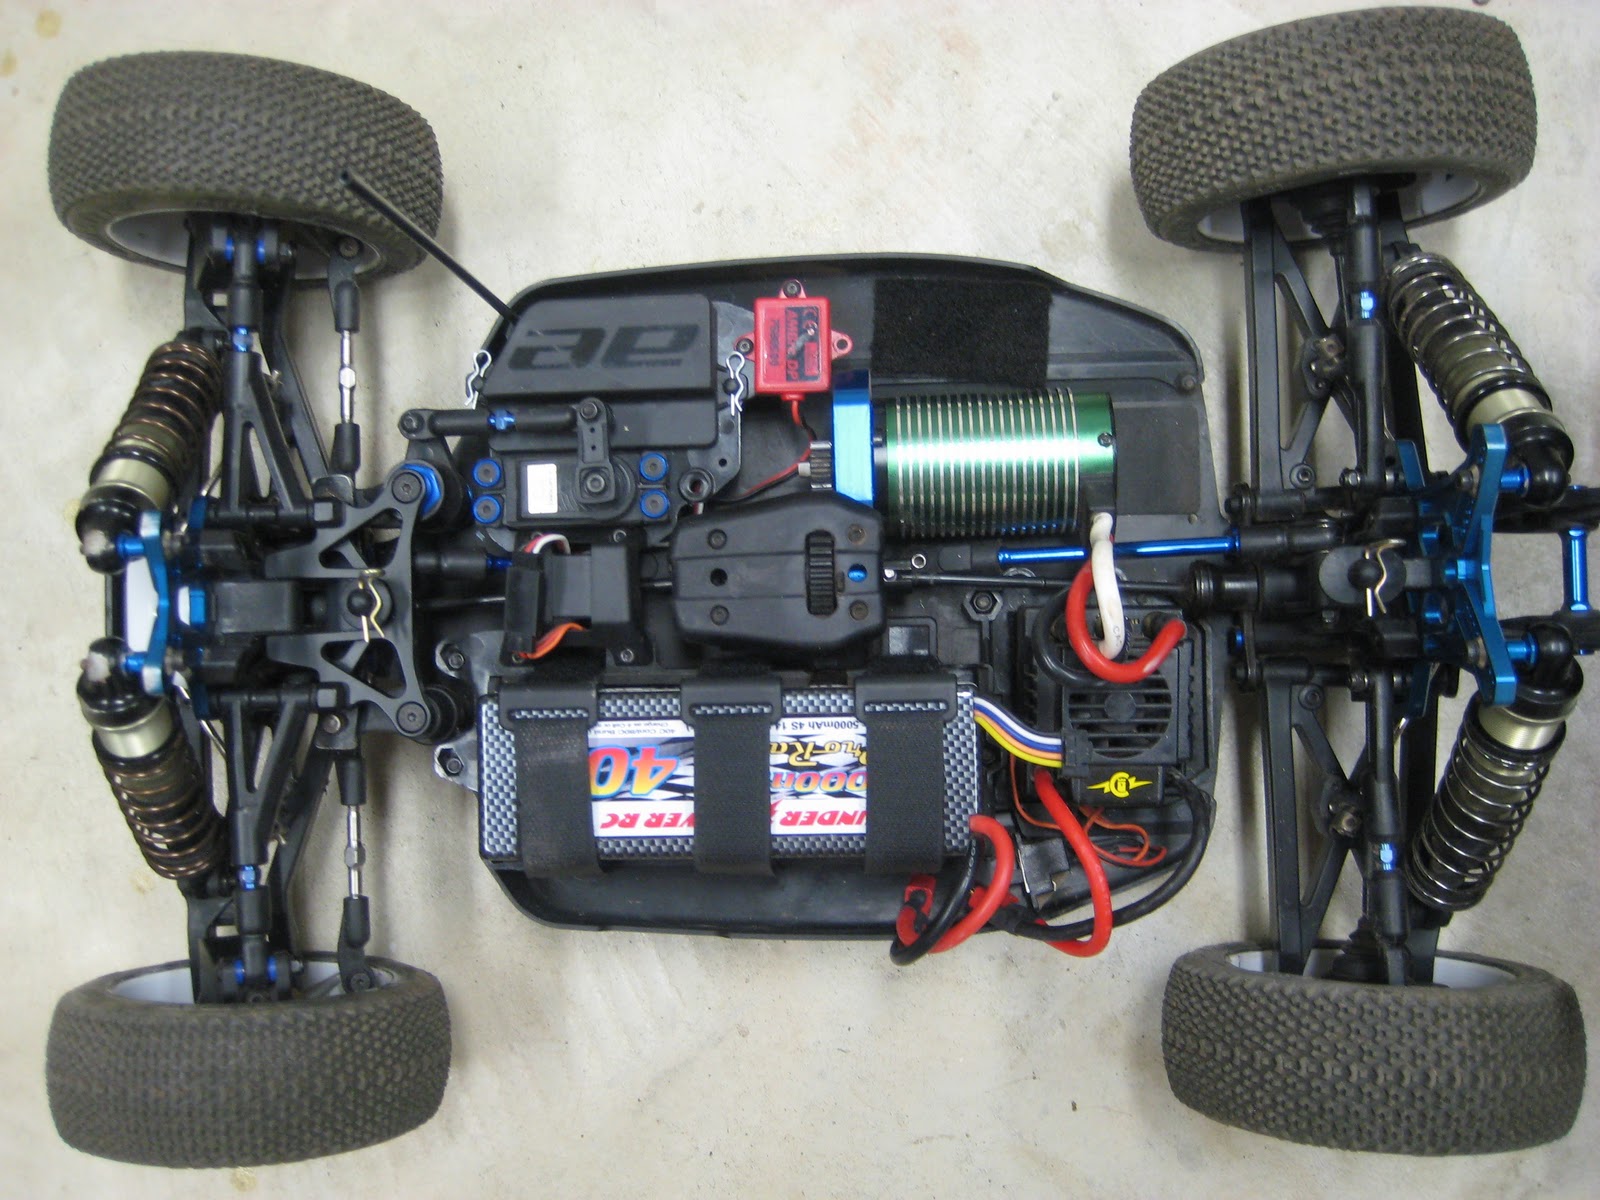 R/C Tech Forums - View Single Post - Team Associated RC8Be Thread.